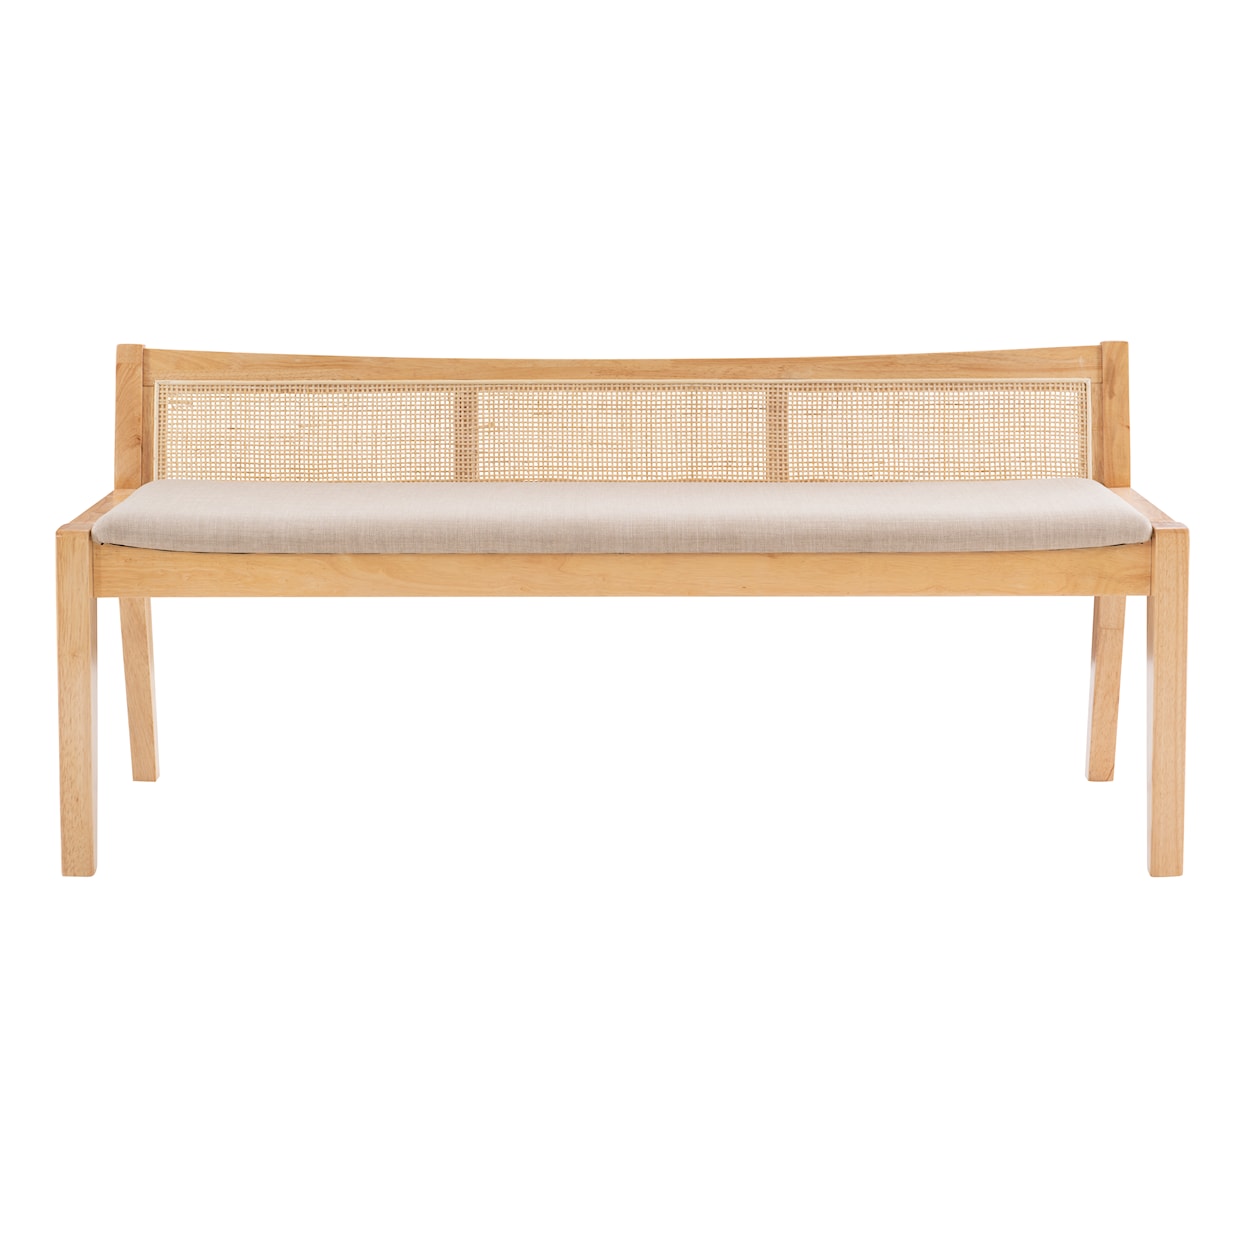 Powell Nassau Rattan Cane Bench with Back, Beige